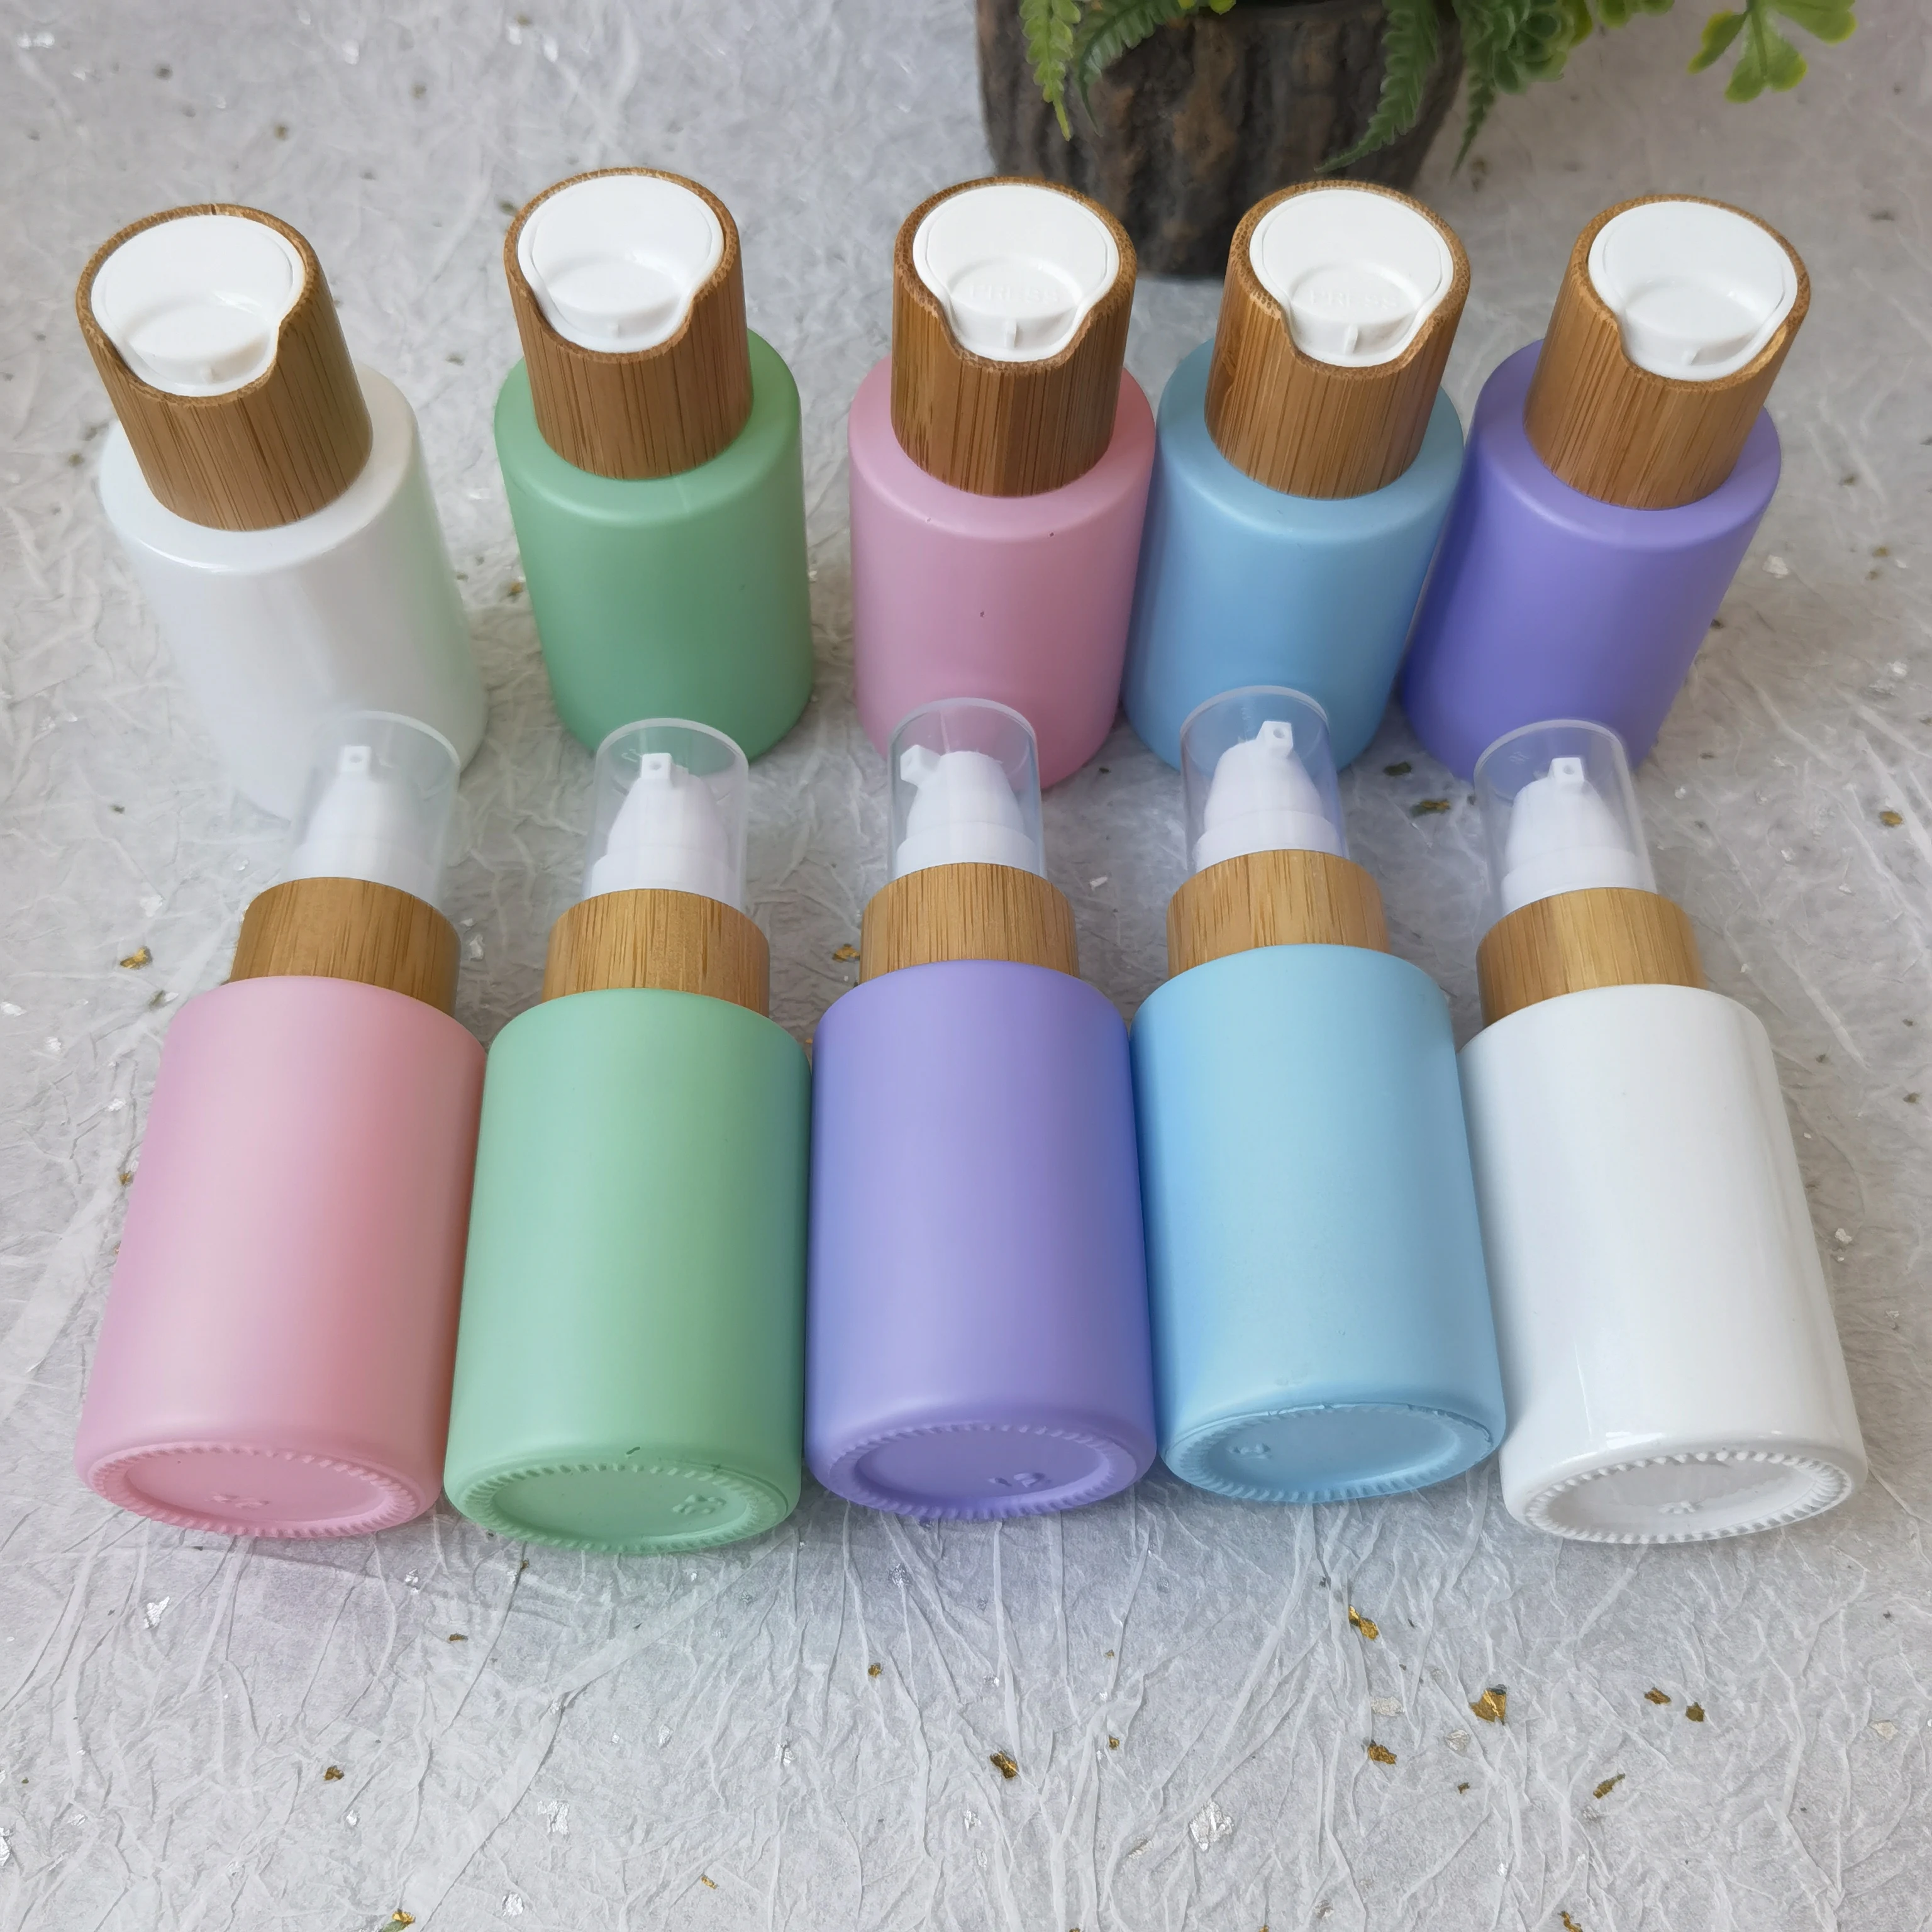 Shipping Free 30ml Perfume Bottles Bamboo Lid Lotion Container Dropper Bottle Cosmetic Travel Bottles Set